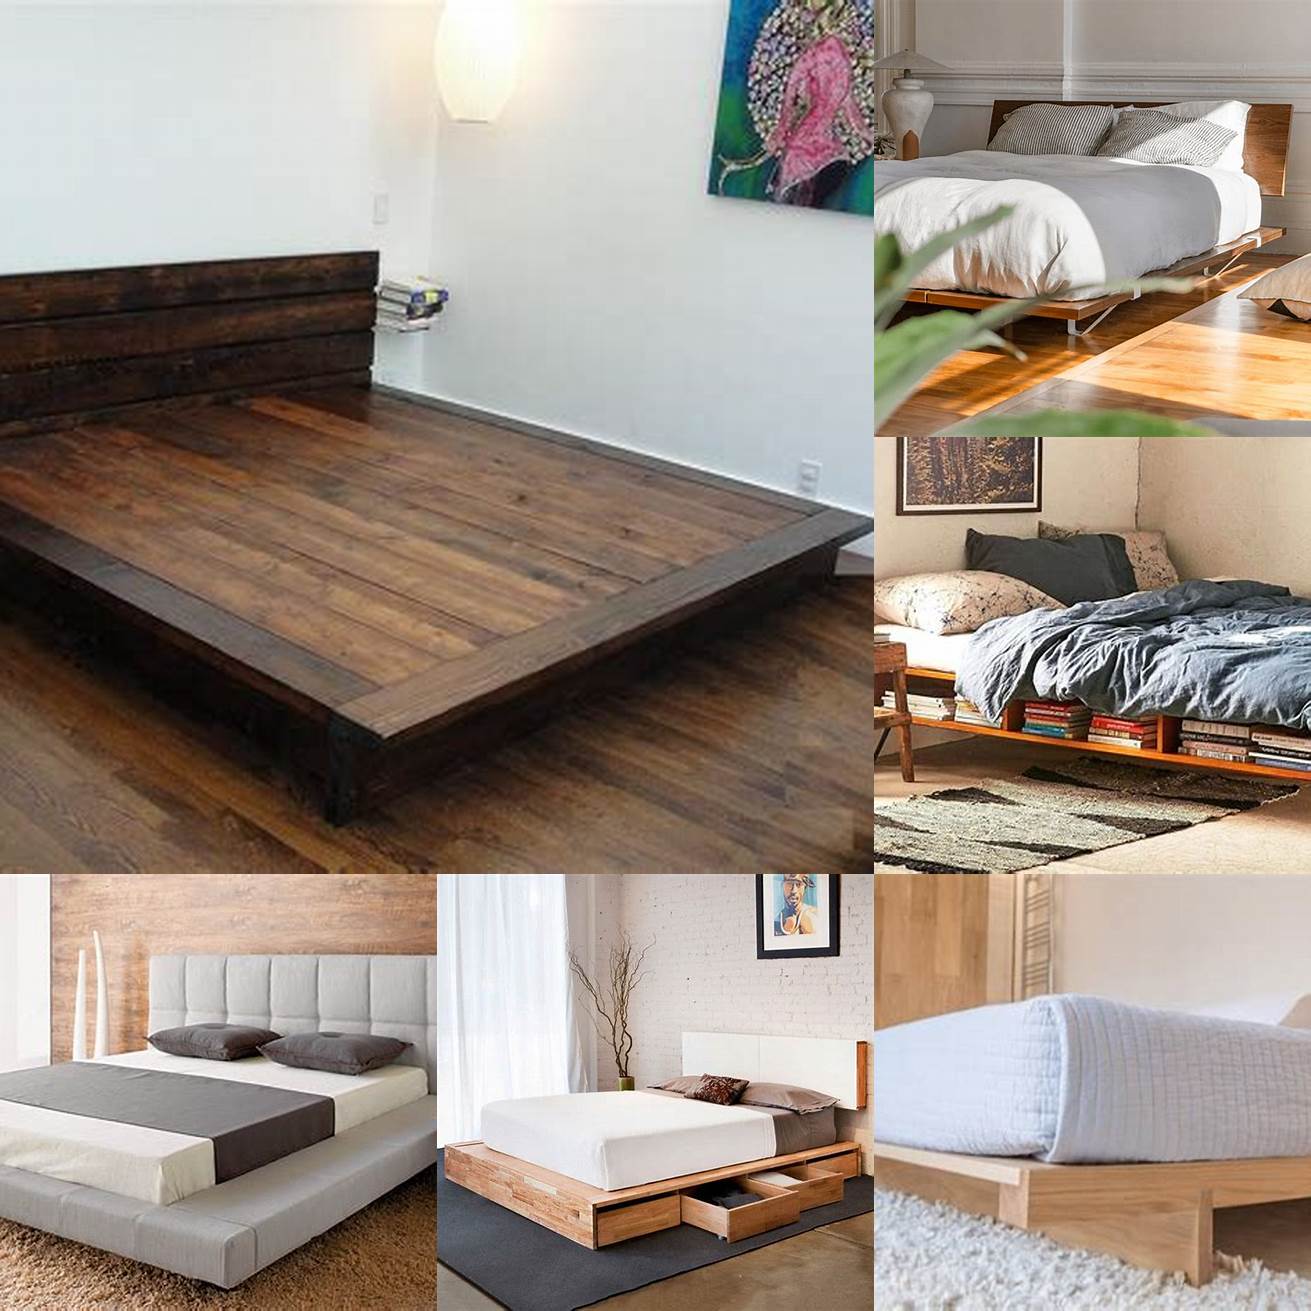 A minimalist platform bed frame with clean lines